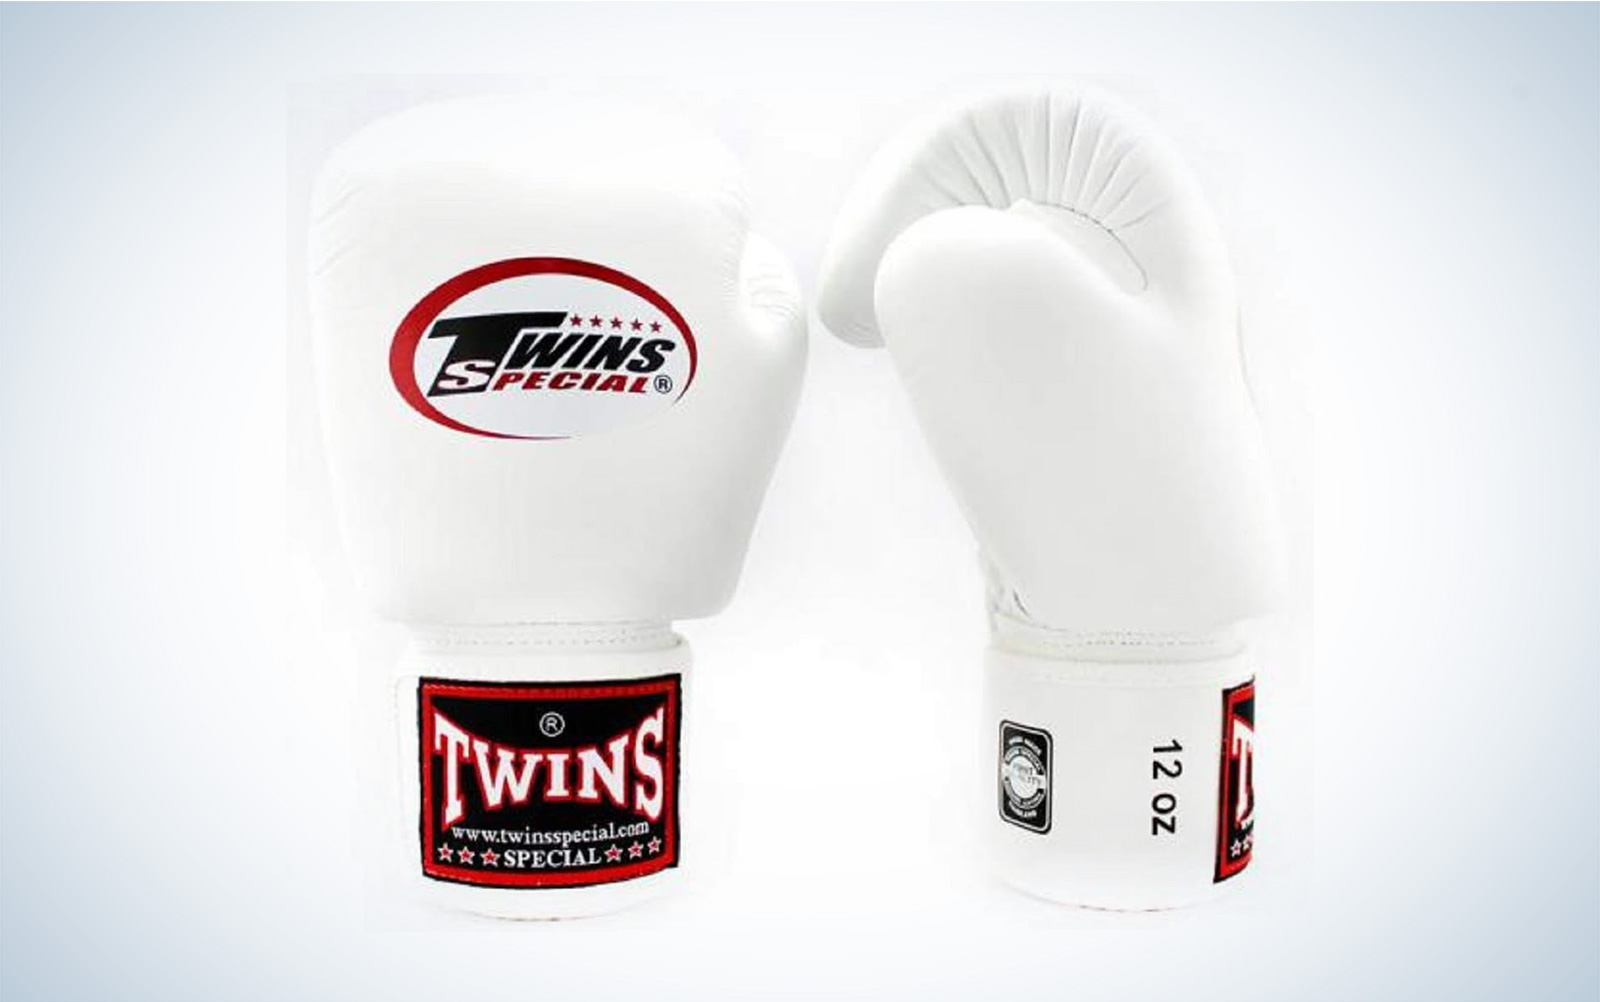 How to Choose the Best Boxing Gloves for Beginners